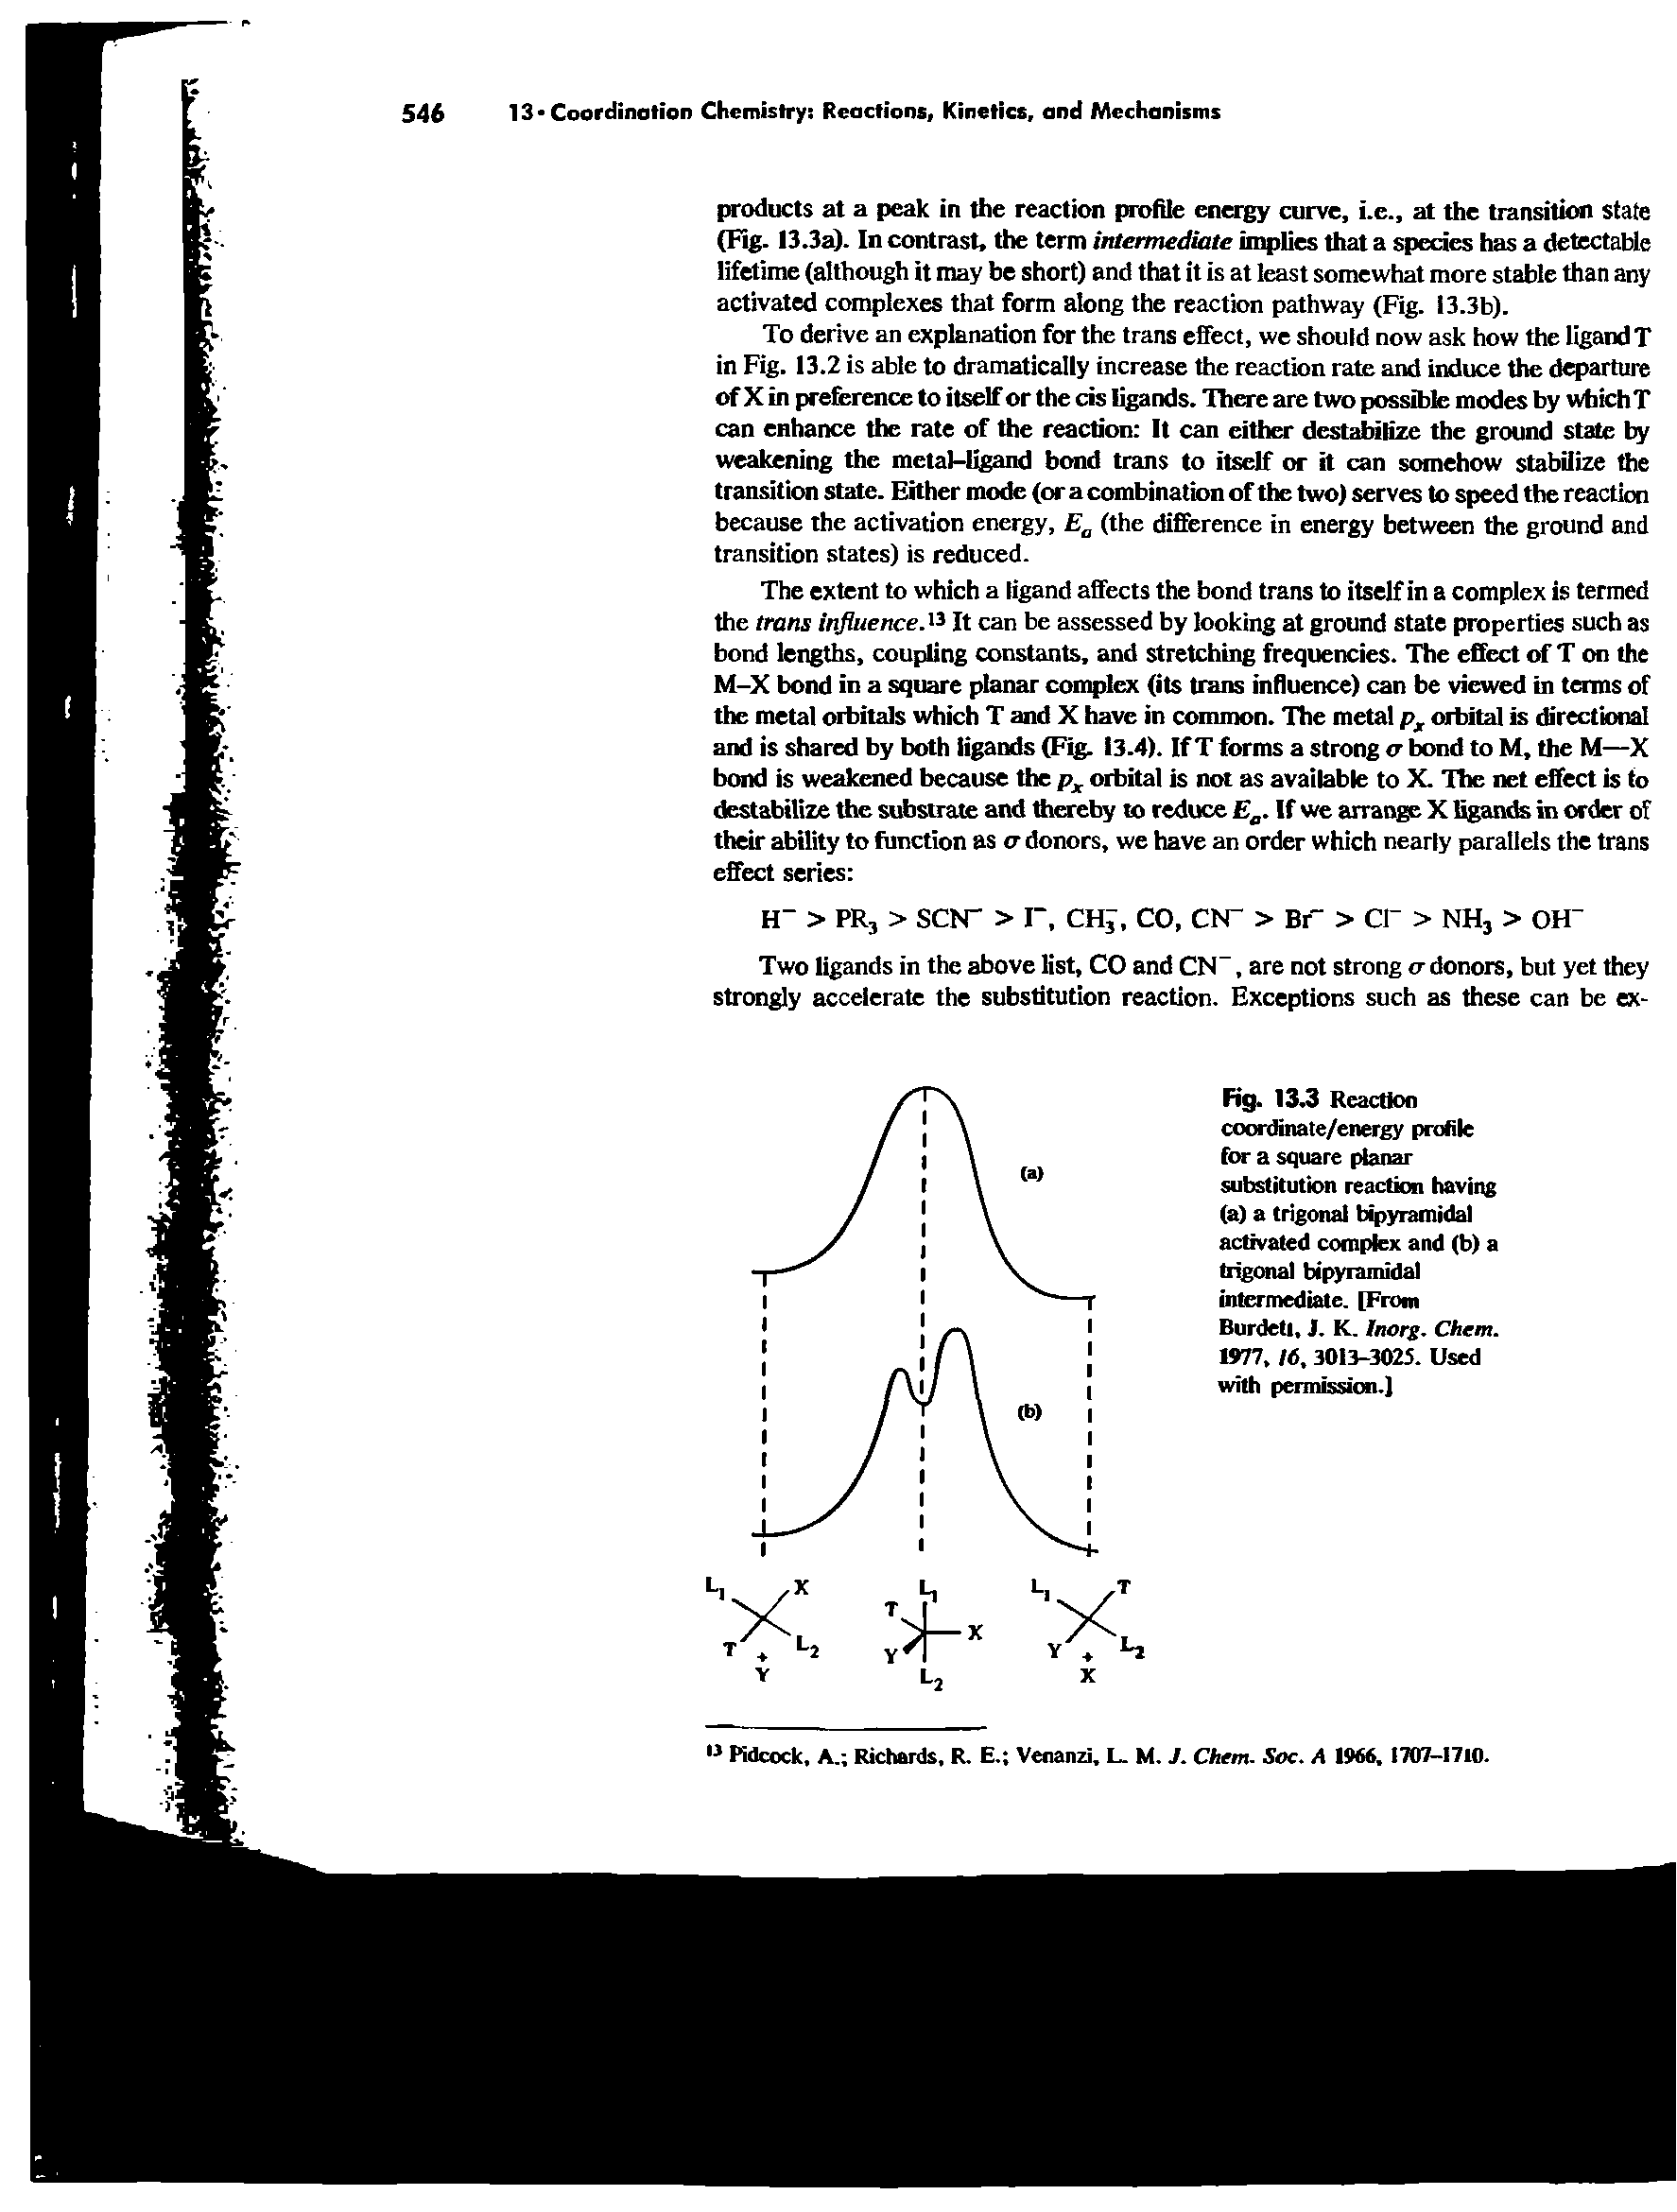 Fig. 13.3 Reaction coordinate/energy profile for a square planar substitution reaction having (a) a trigonal bipyramidal activated complex and (b) a trigonal bipyramidal intermediate. [From Burdetl, 1. K. Inorg. Chem. 1977, 16, 3013-3025. Used with permission.)...